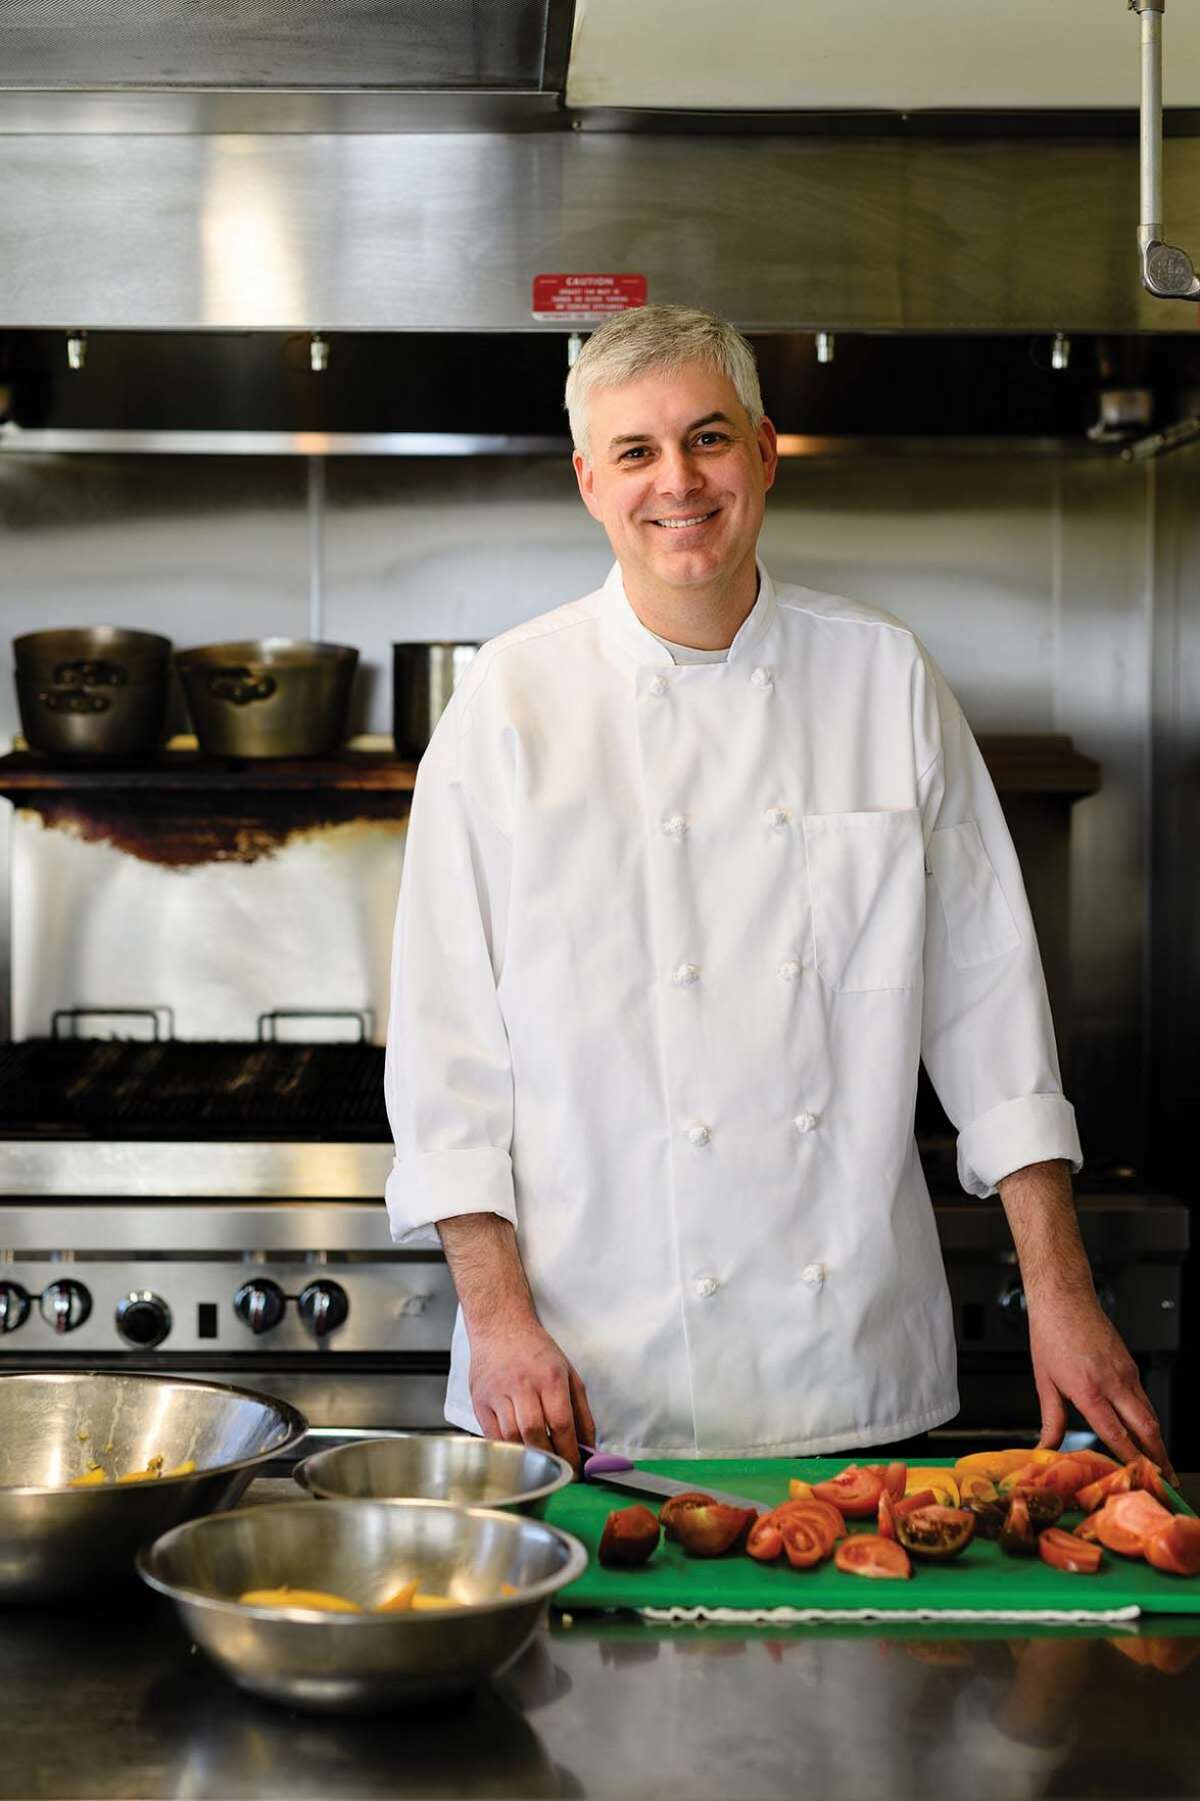 Peter Vath, chef at Savour Cafe & Bakery in Centerbrook